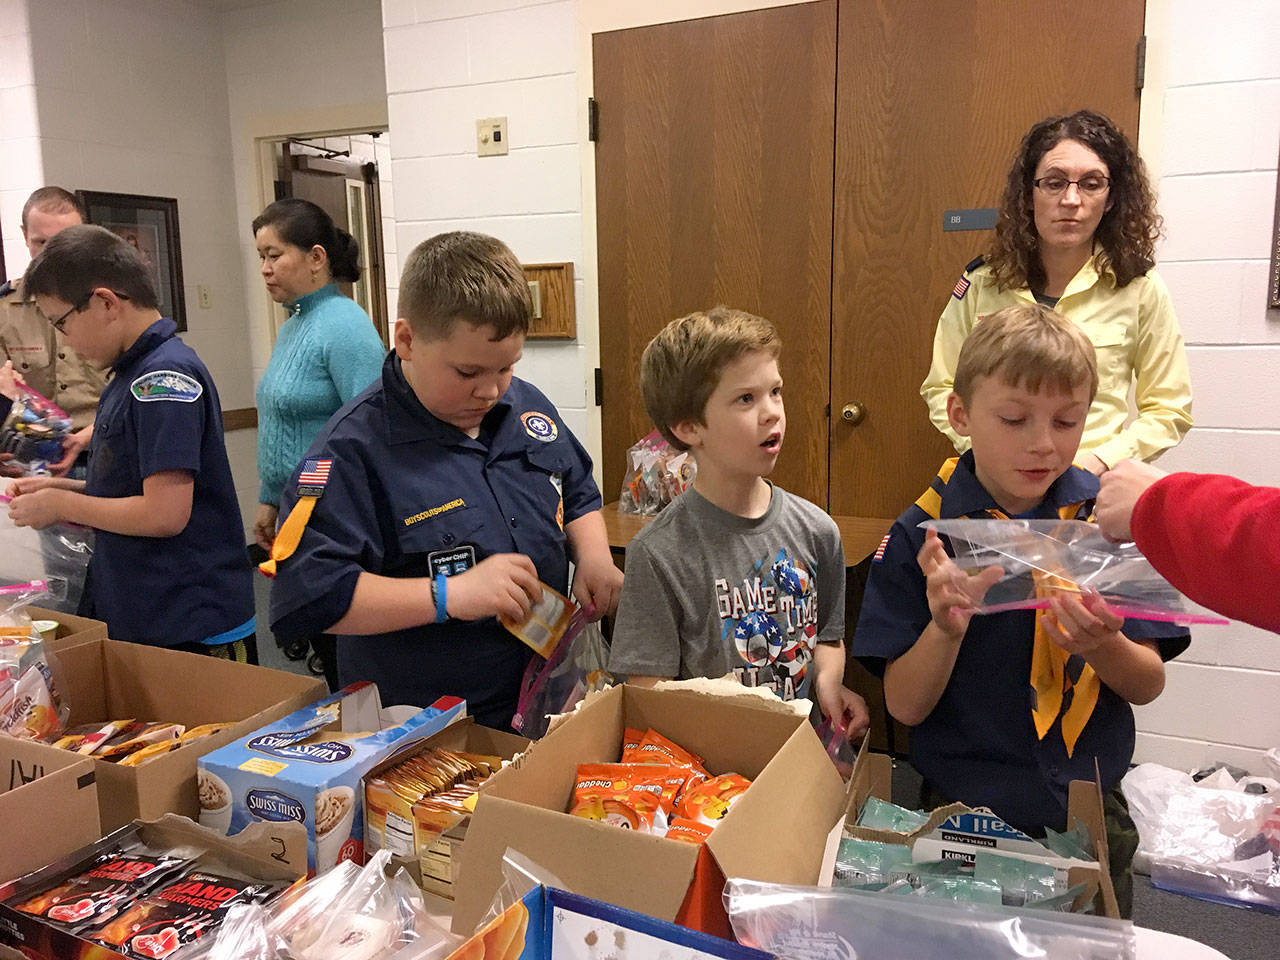 Members of the Church of Jesus Christ of Latter-day Saints Cub Scouts packs 305 and 301, led by committee chairs Dan Miller and Becky Kelly, on Dec. 12 assemble care kits for the homeless who visit the Federal Way Day Center. The care kits included hygiene items and snack food and fleece scarves the boys made. The day center relies on donations like these from the community. Contributed photo